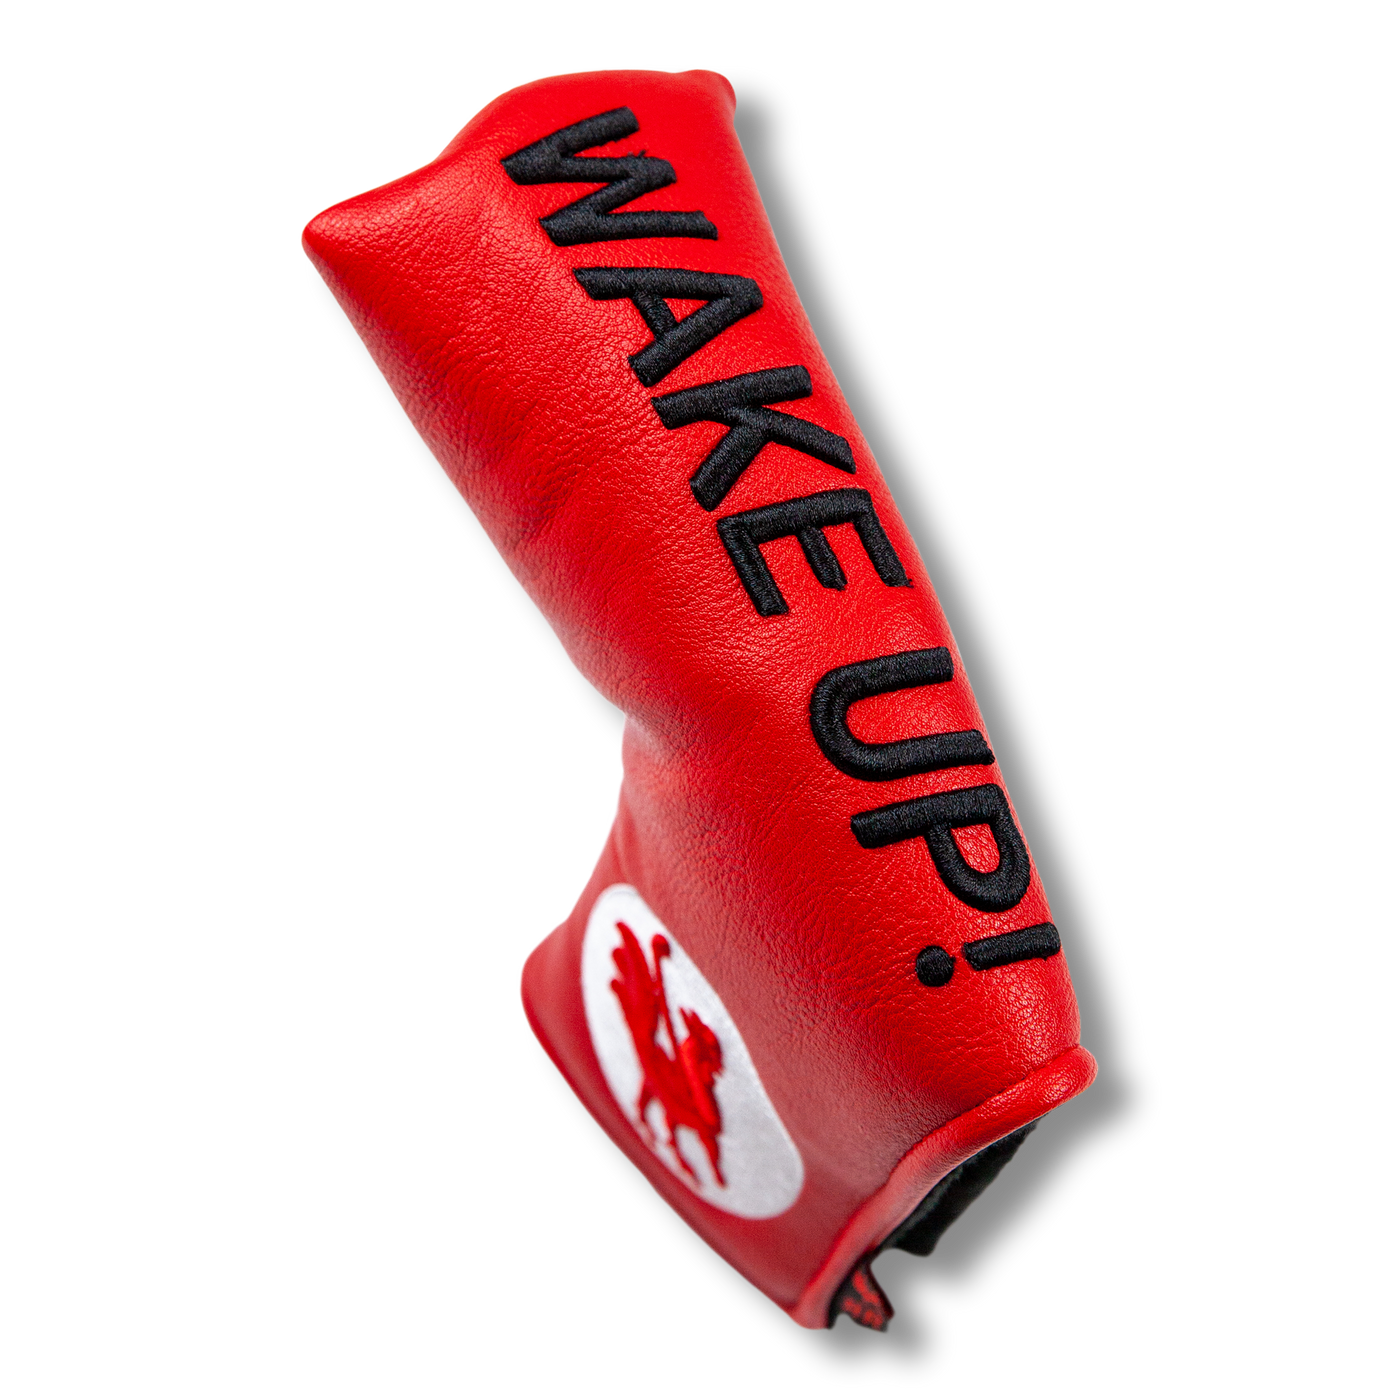 Blade Putter - The Nest (red)